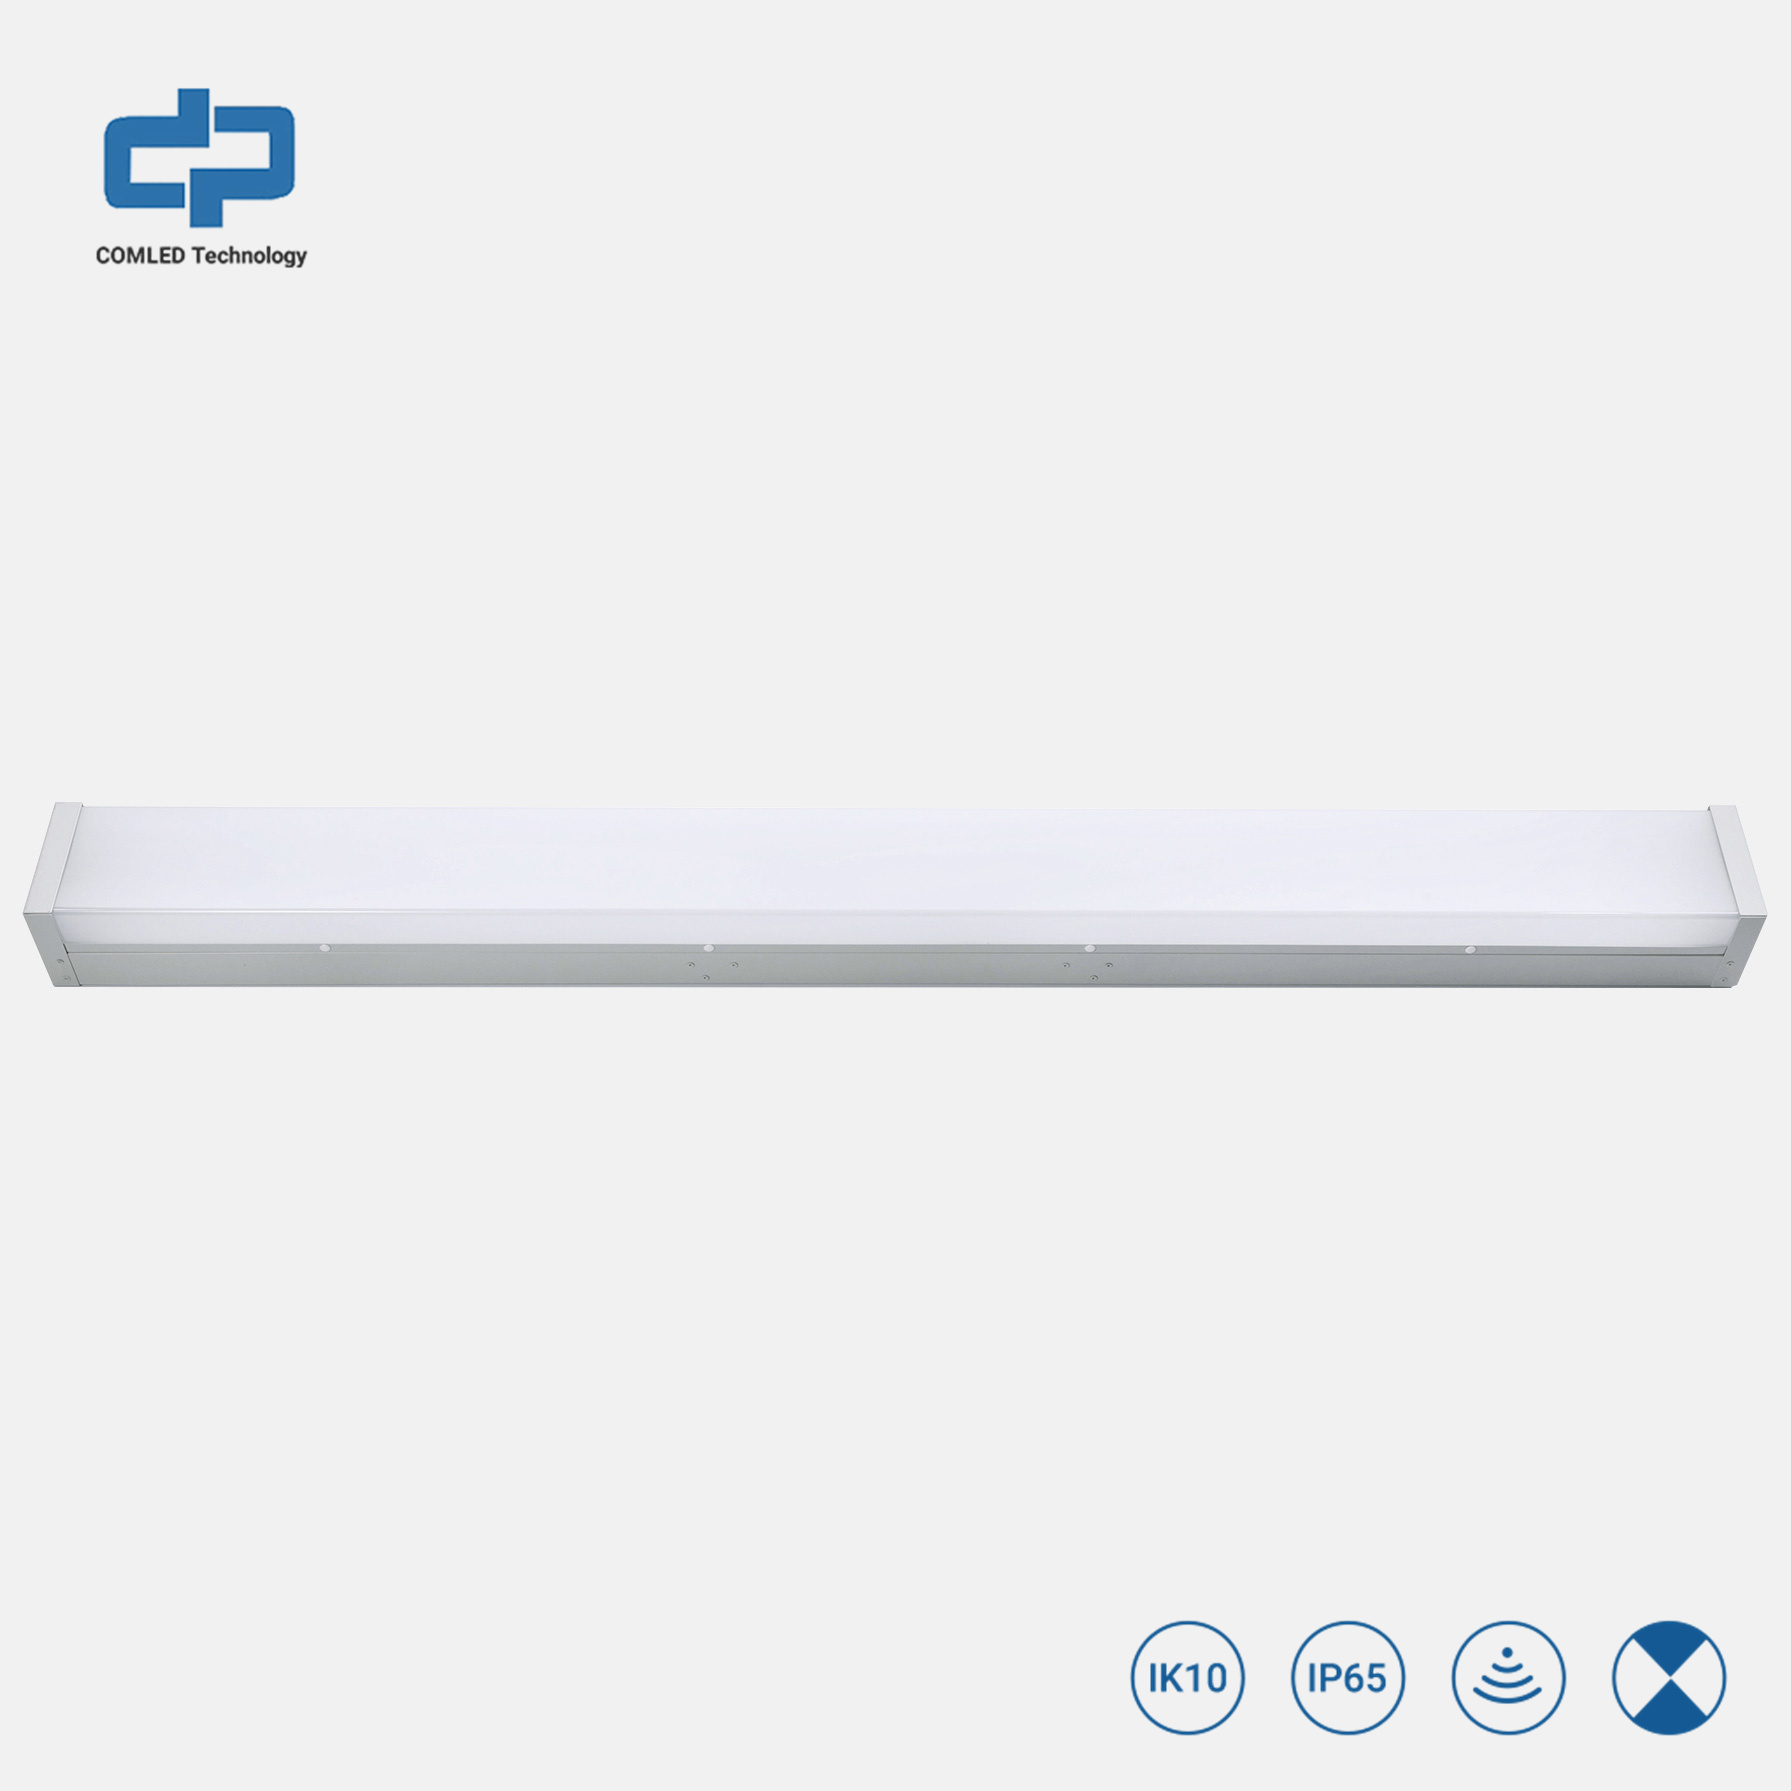 IP20 led strip linear lumahing fixture Featured Image